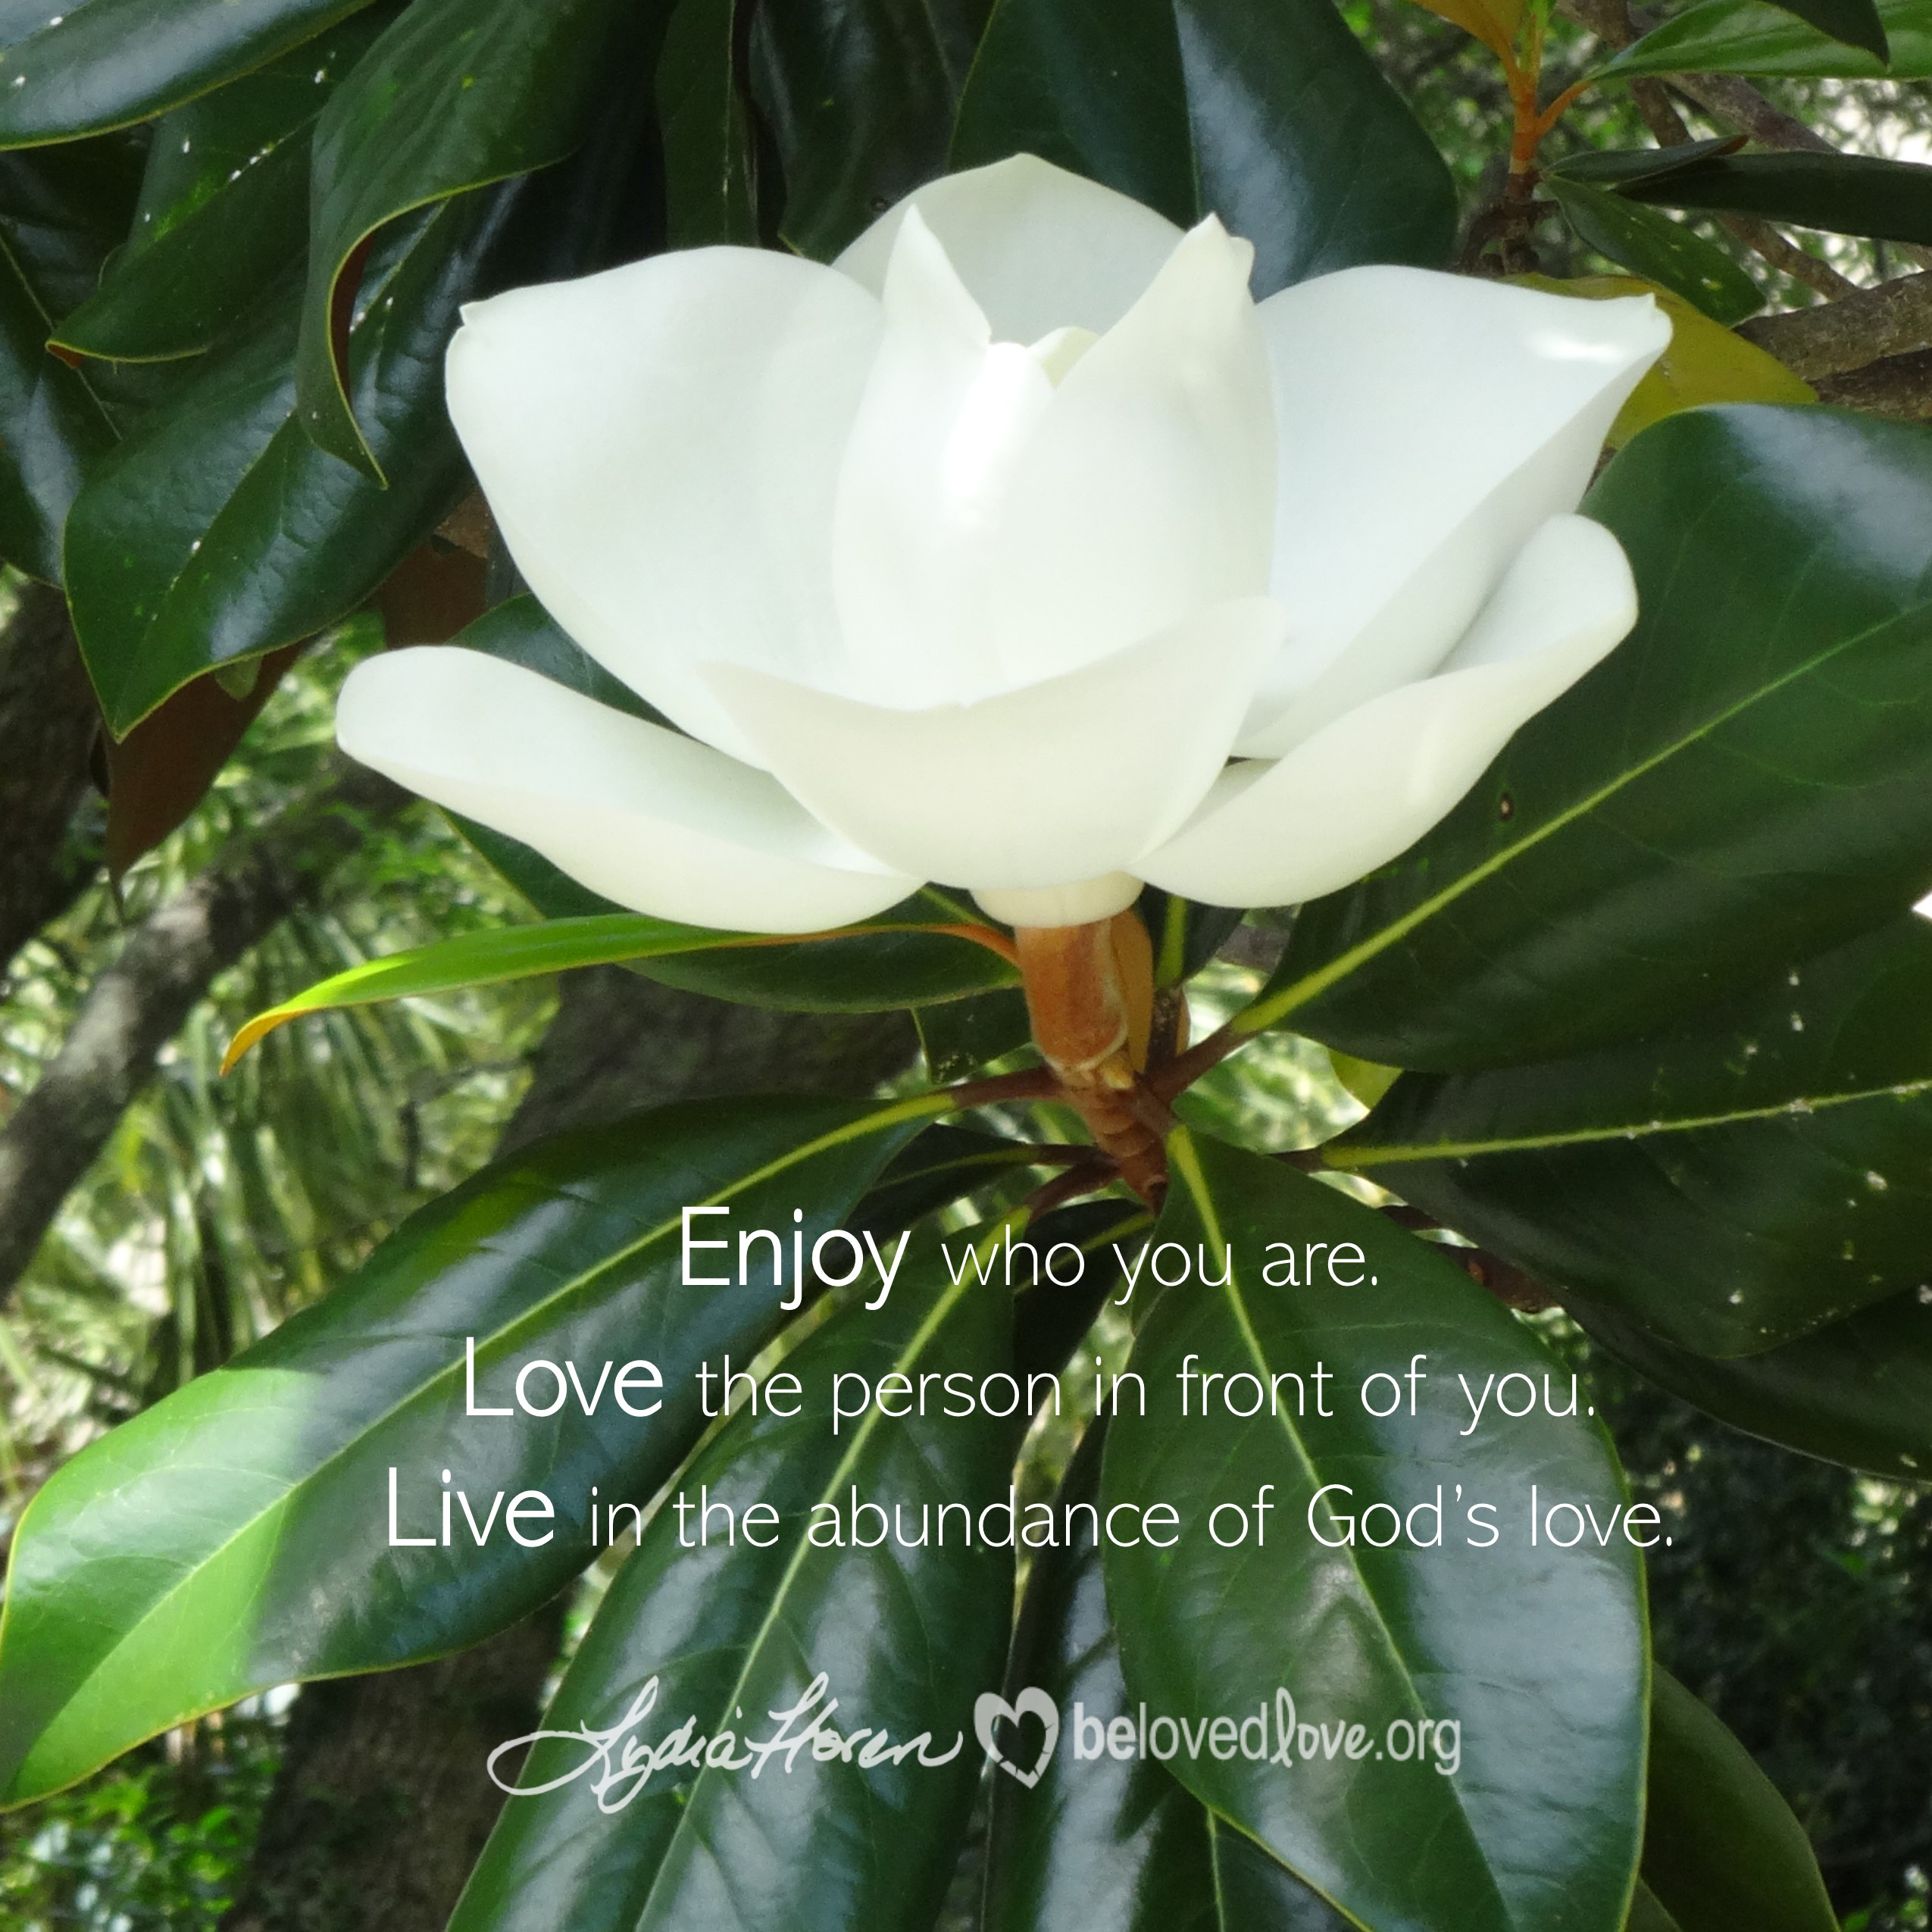 Enjoy who you are. Love the person in front of you. Live in the abundance of God's love.